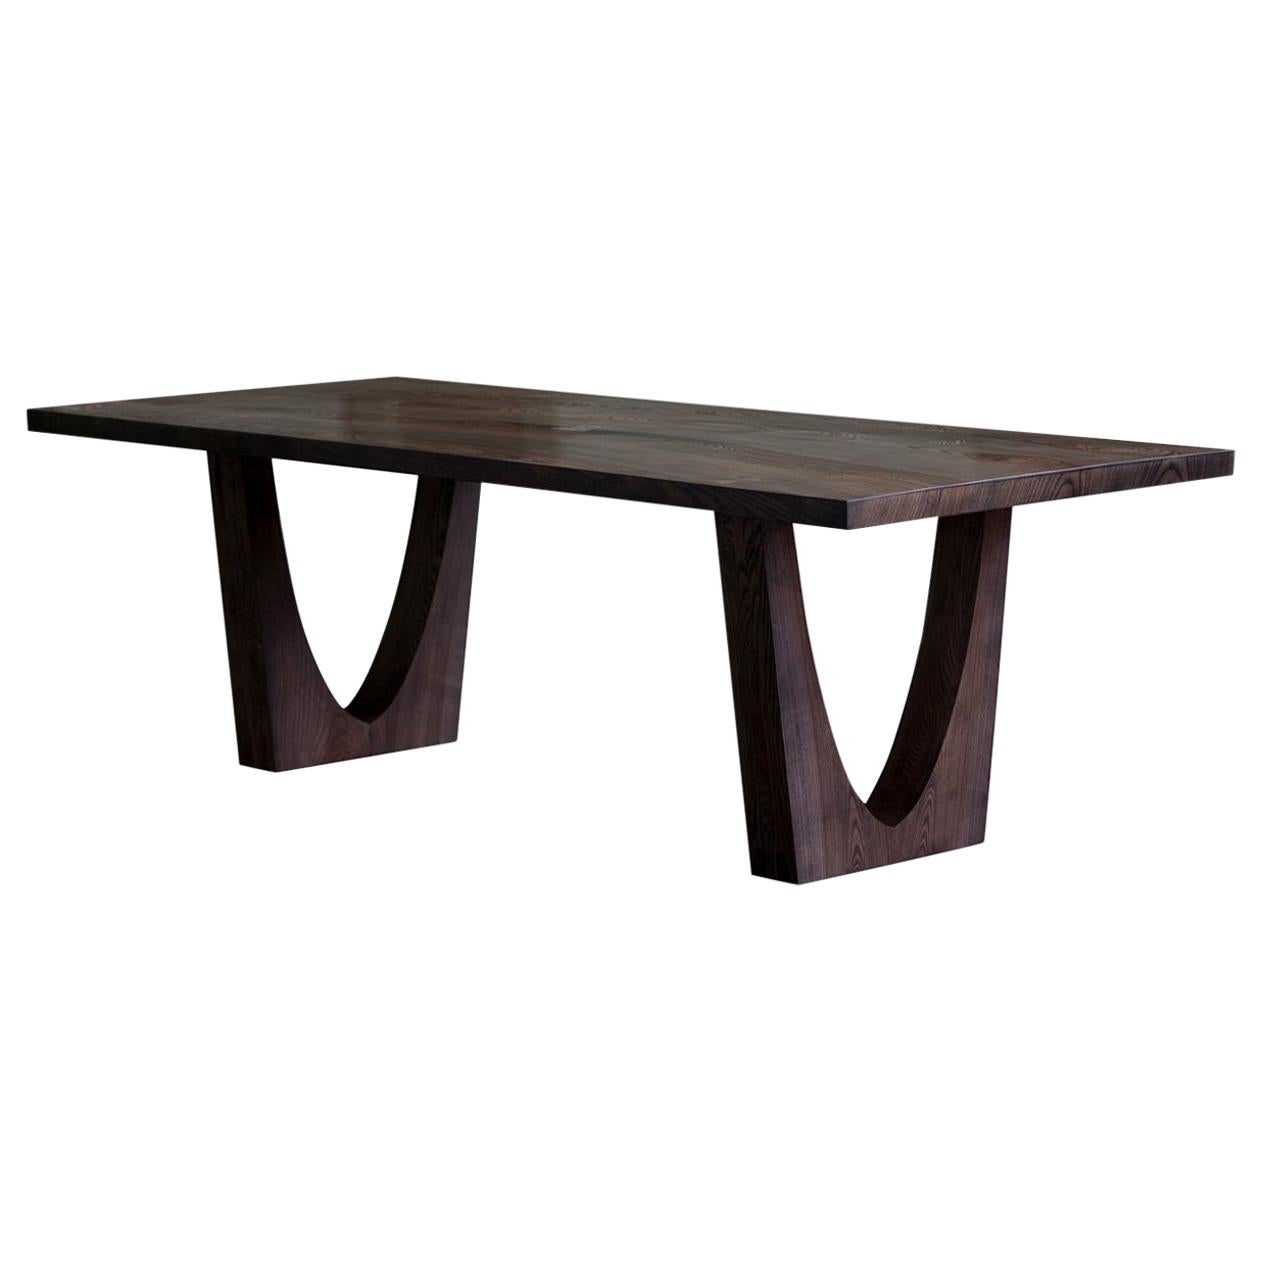 Table, solid ash, bronze grain top with butterfly joints. Jonathan Field. unique